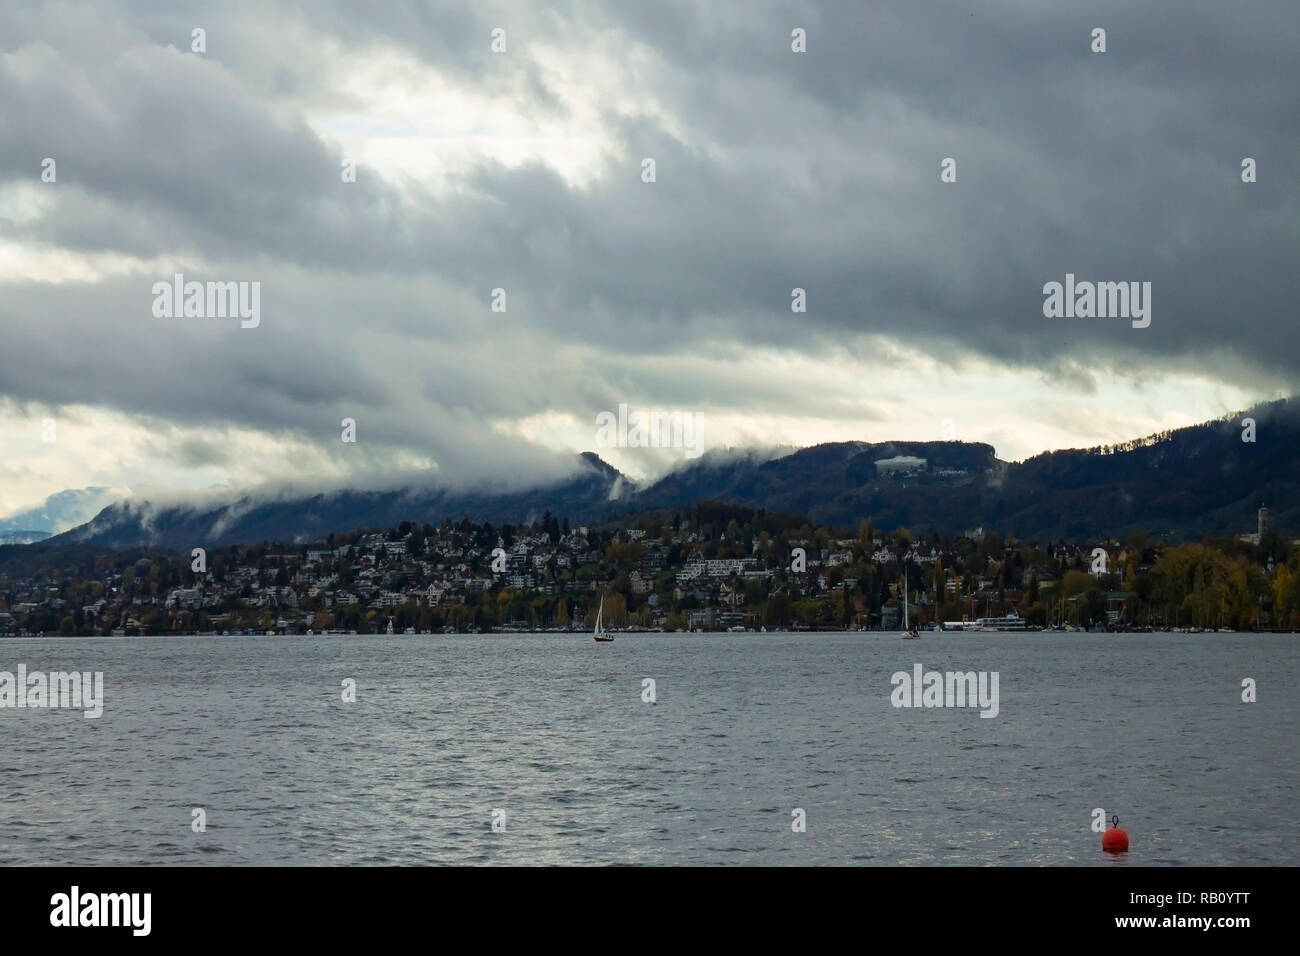 Beautiful cloudy skyscape with snow covered Alps mountains peaks on horizon. Lake Zurich landscape, central Switzerland. Vivid color. No people Stock Photo